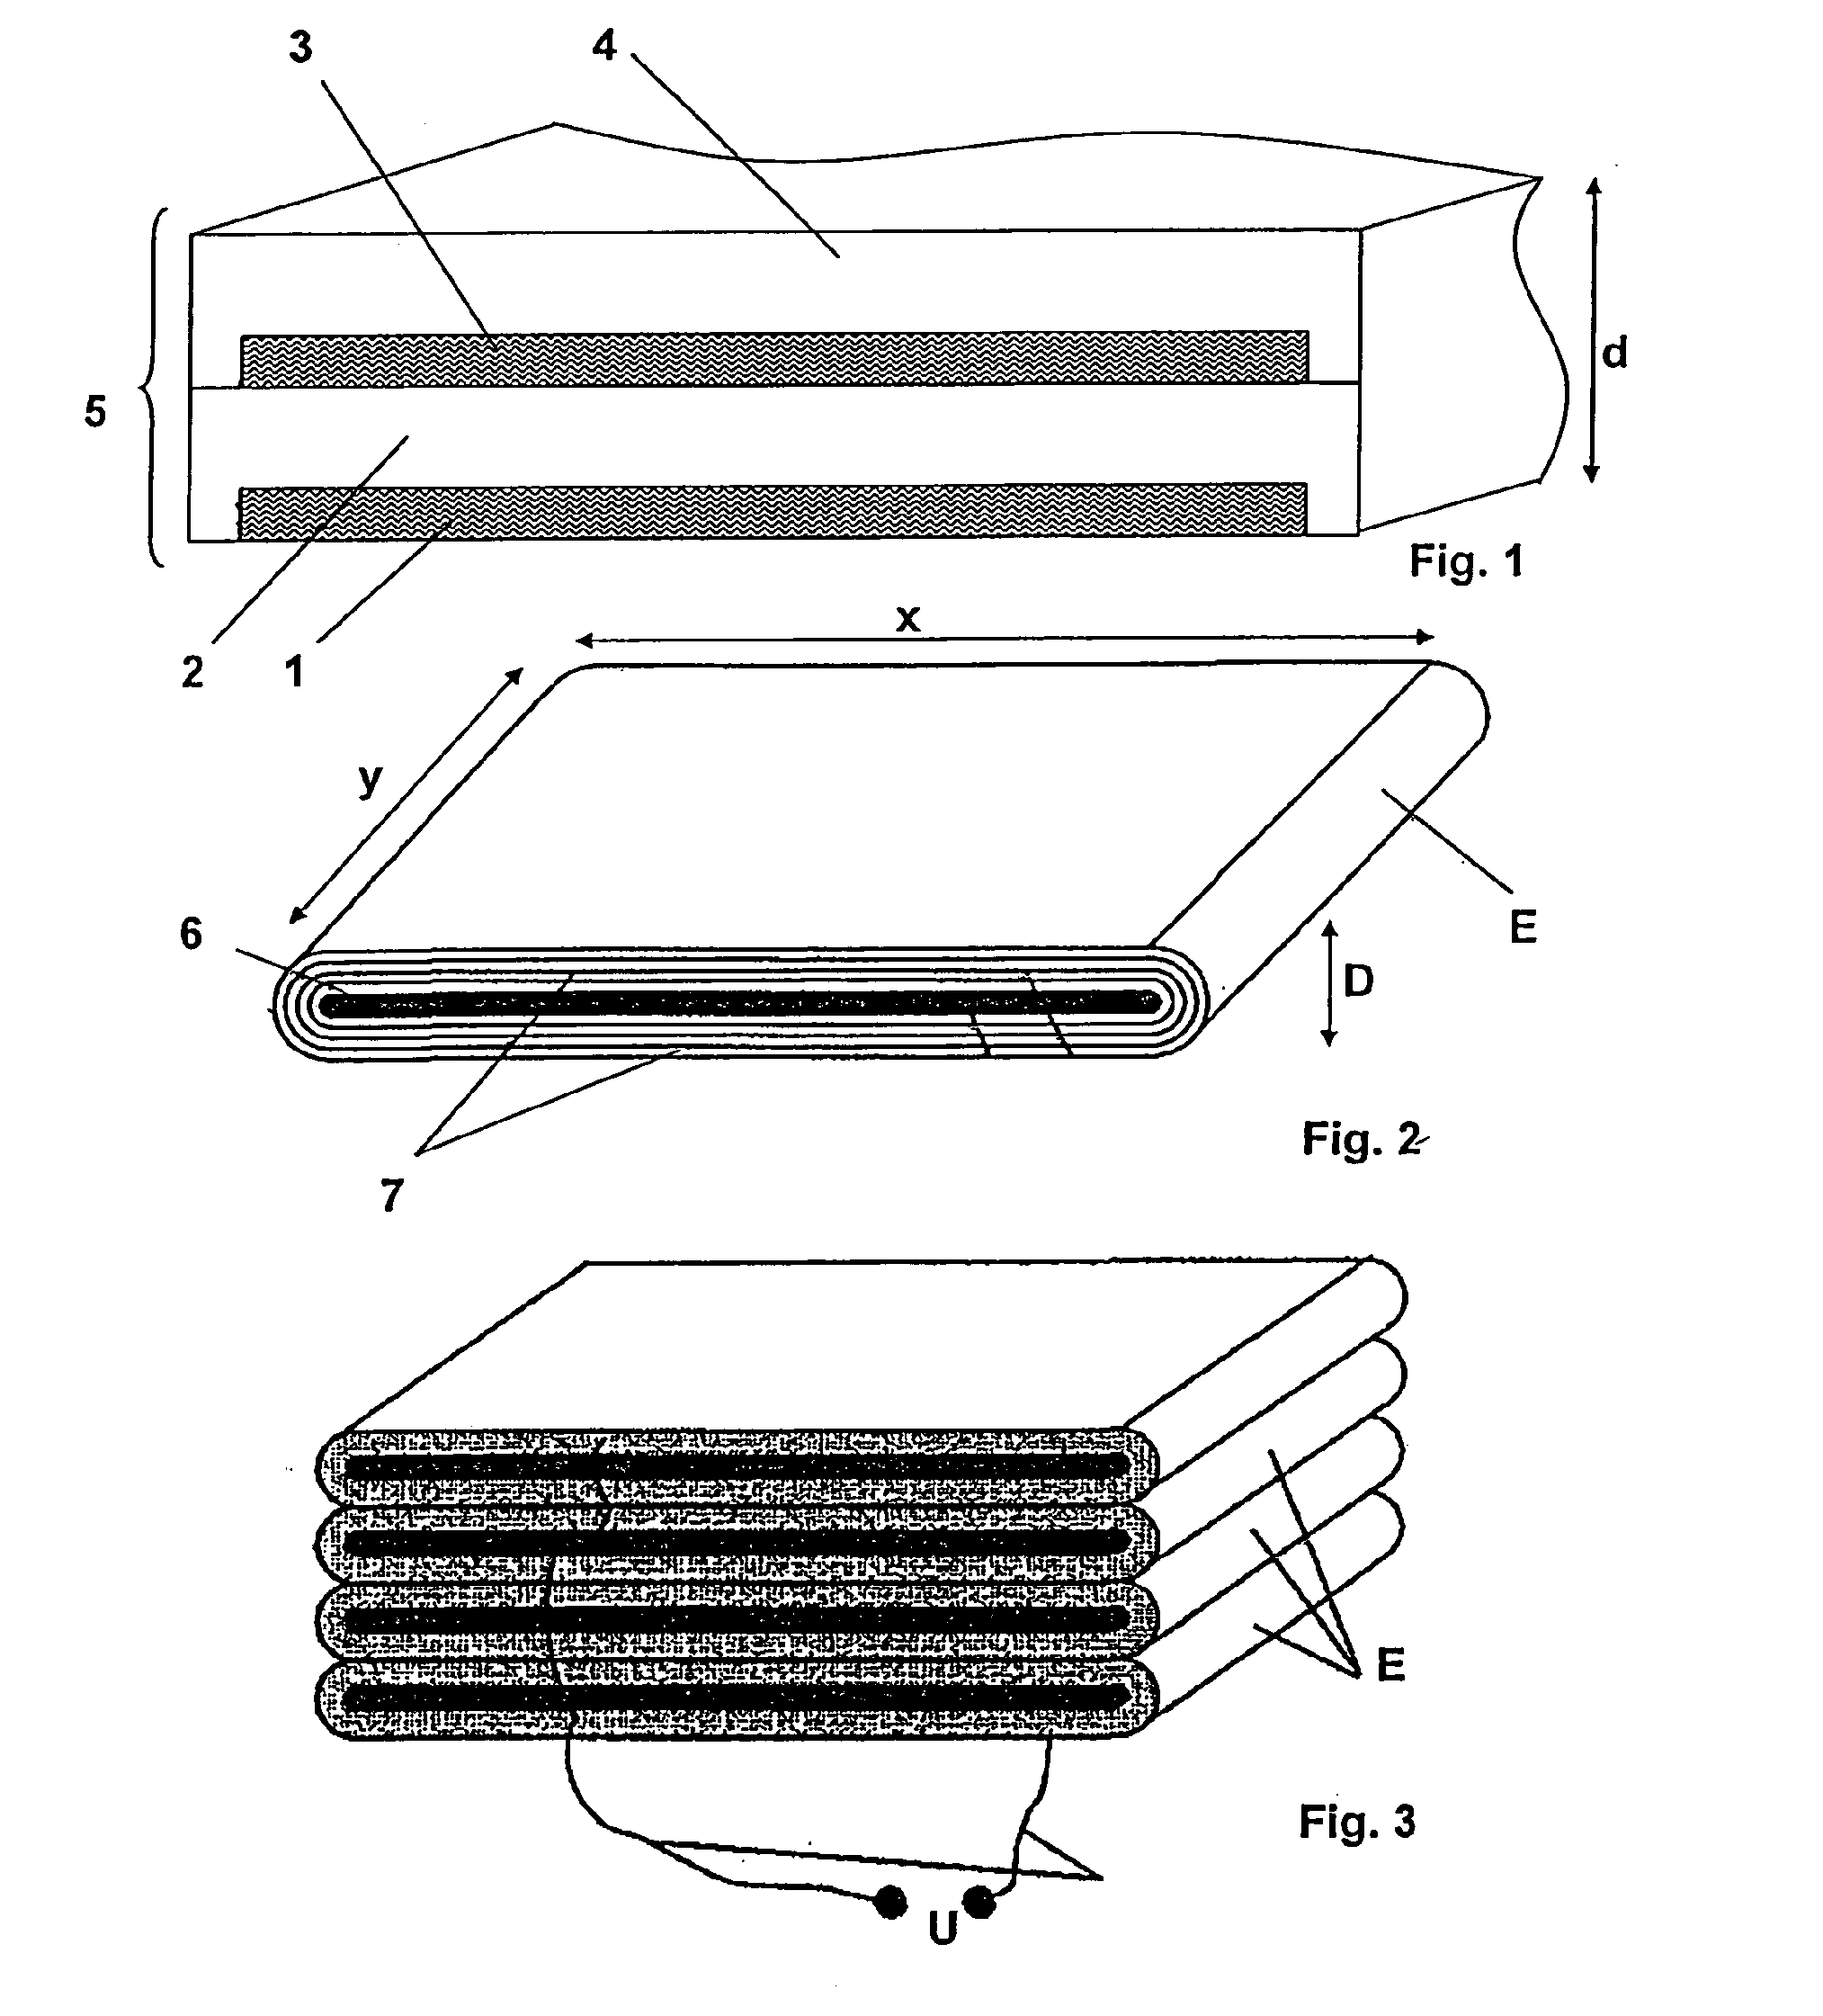 Electroactive elastomer actuator and method for the production thereof